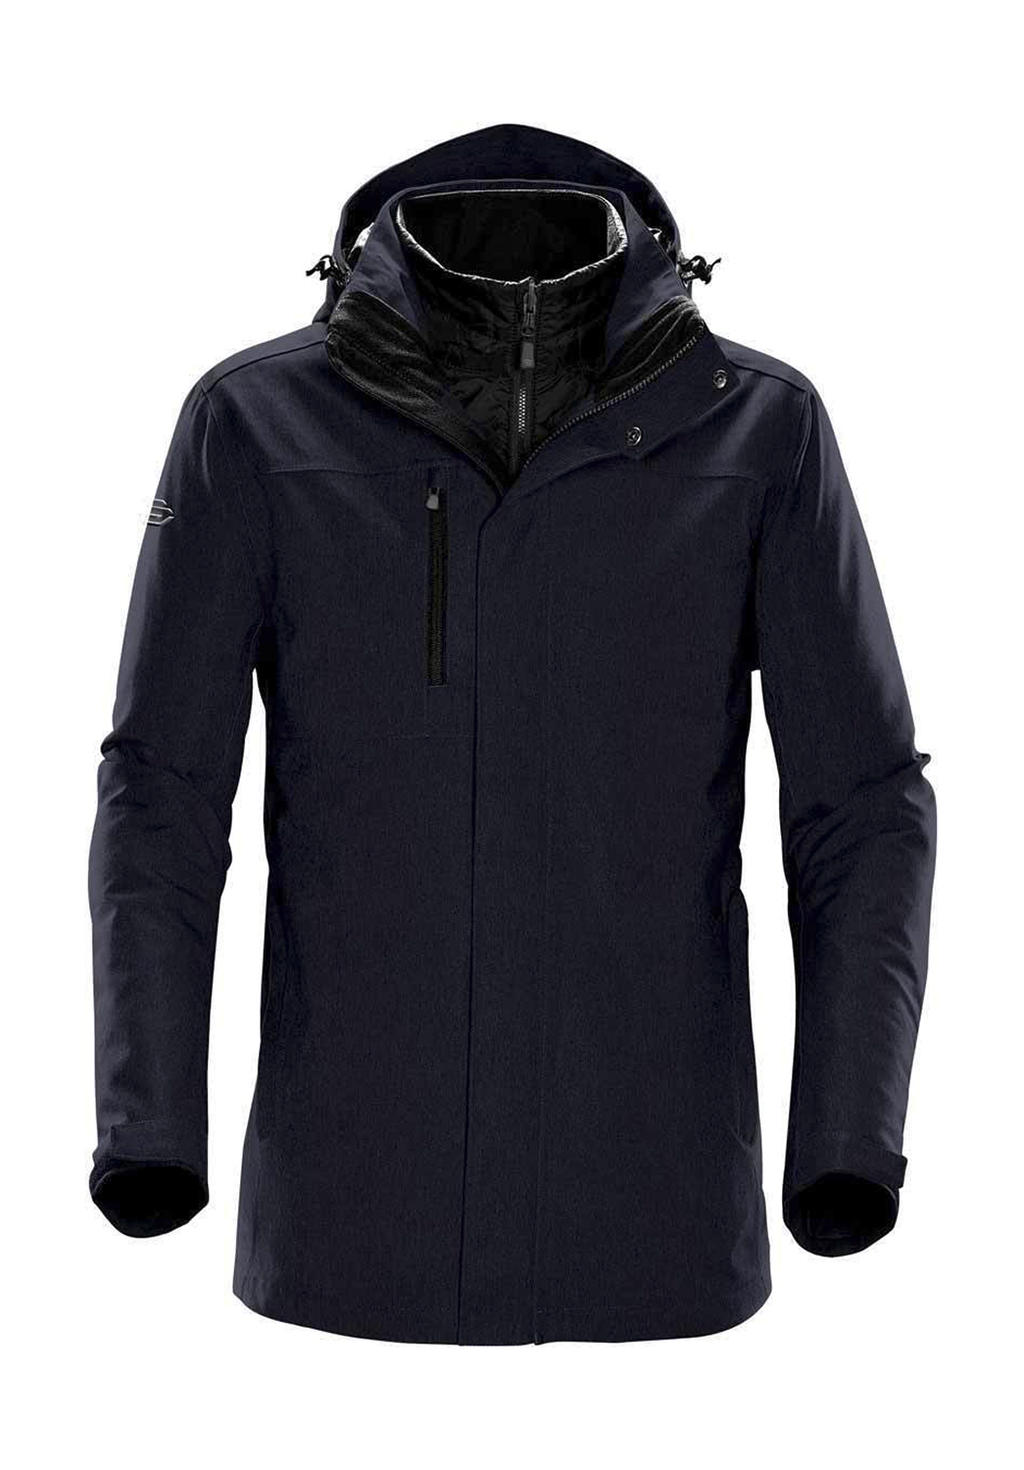  Mens Avalanche System Jacket in Farbe Navy Twill